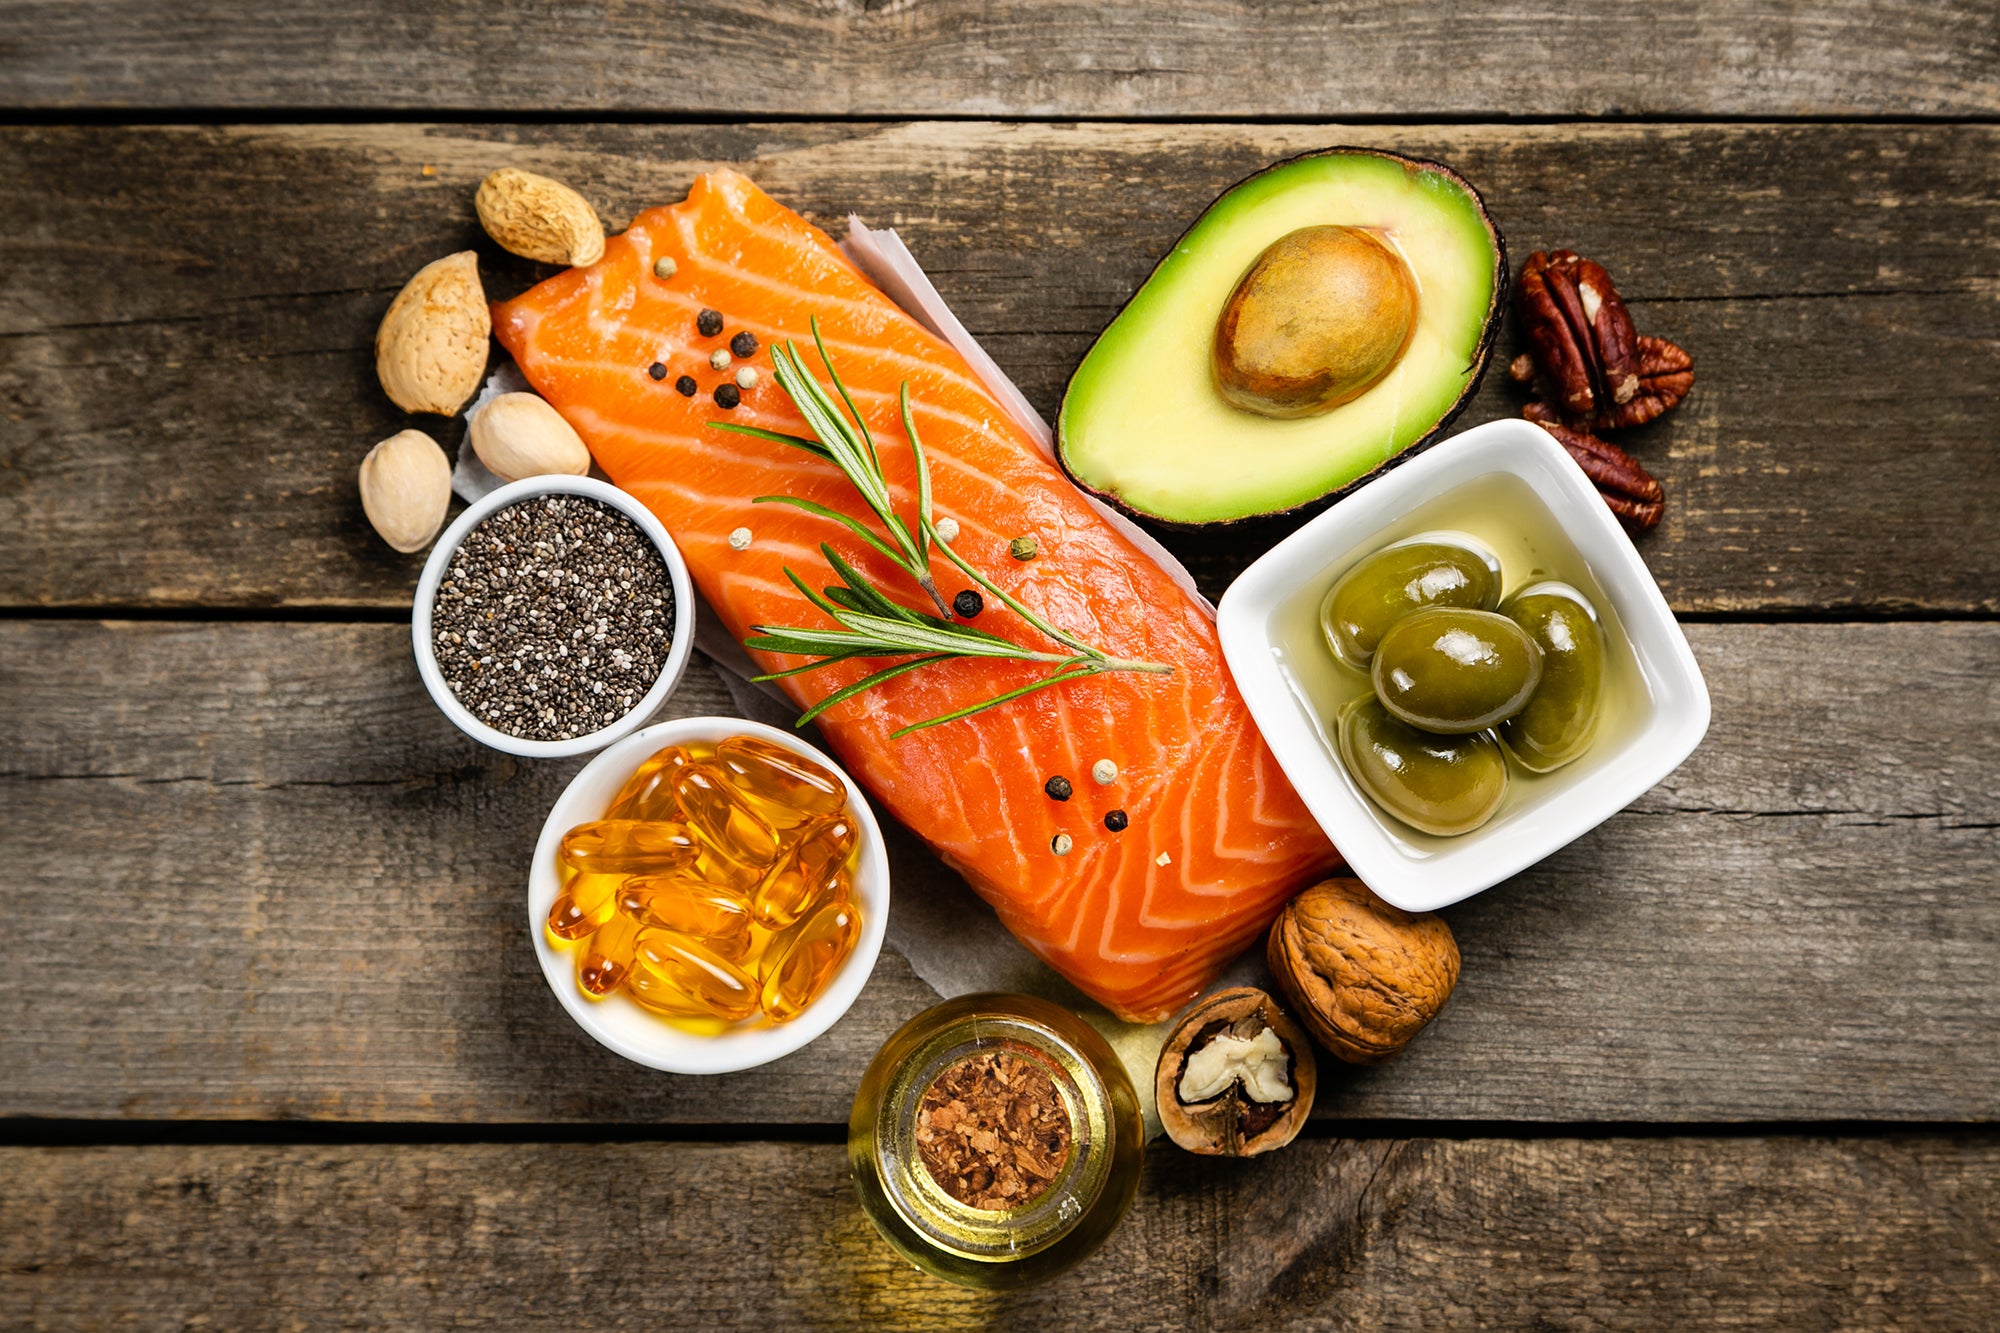 Finding Balance in the Omega-6 to Omega-3 Fatty Acid Ratio